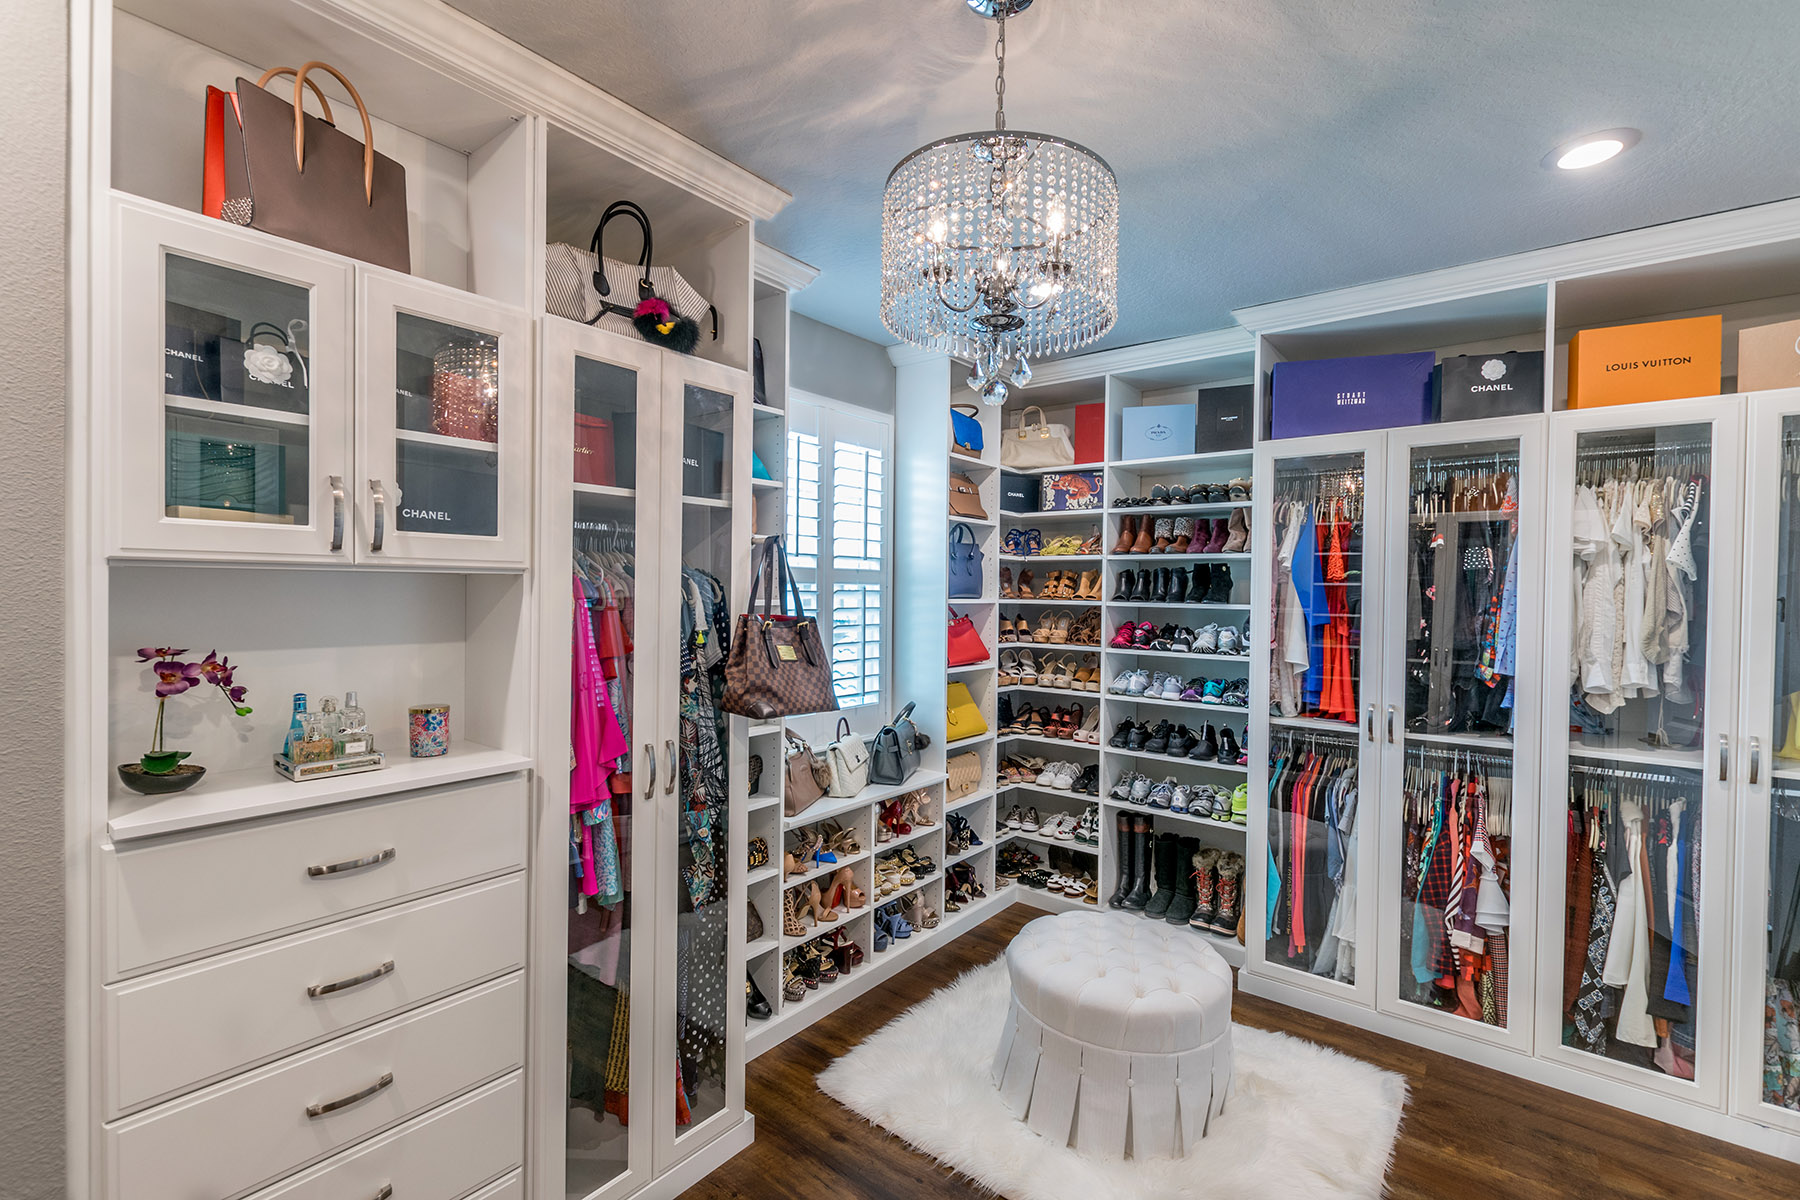 Unica Concept make the best closets in Toronto